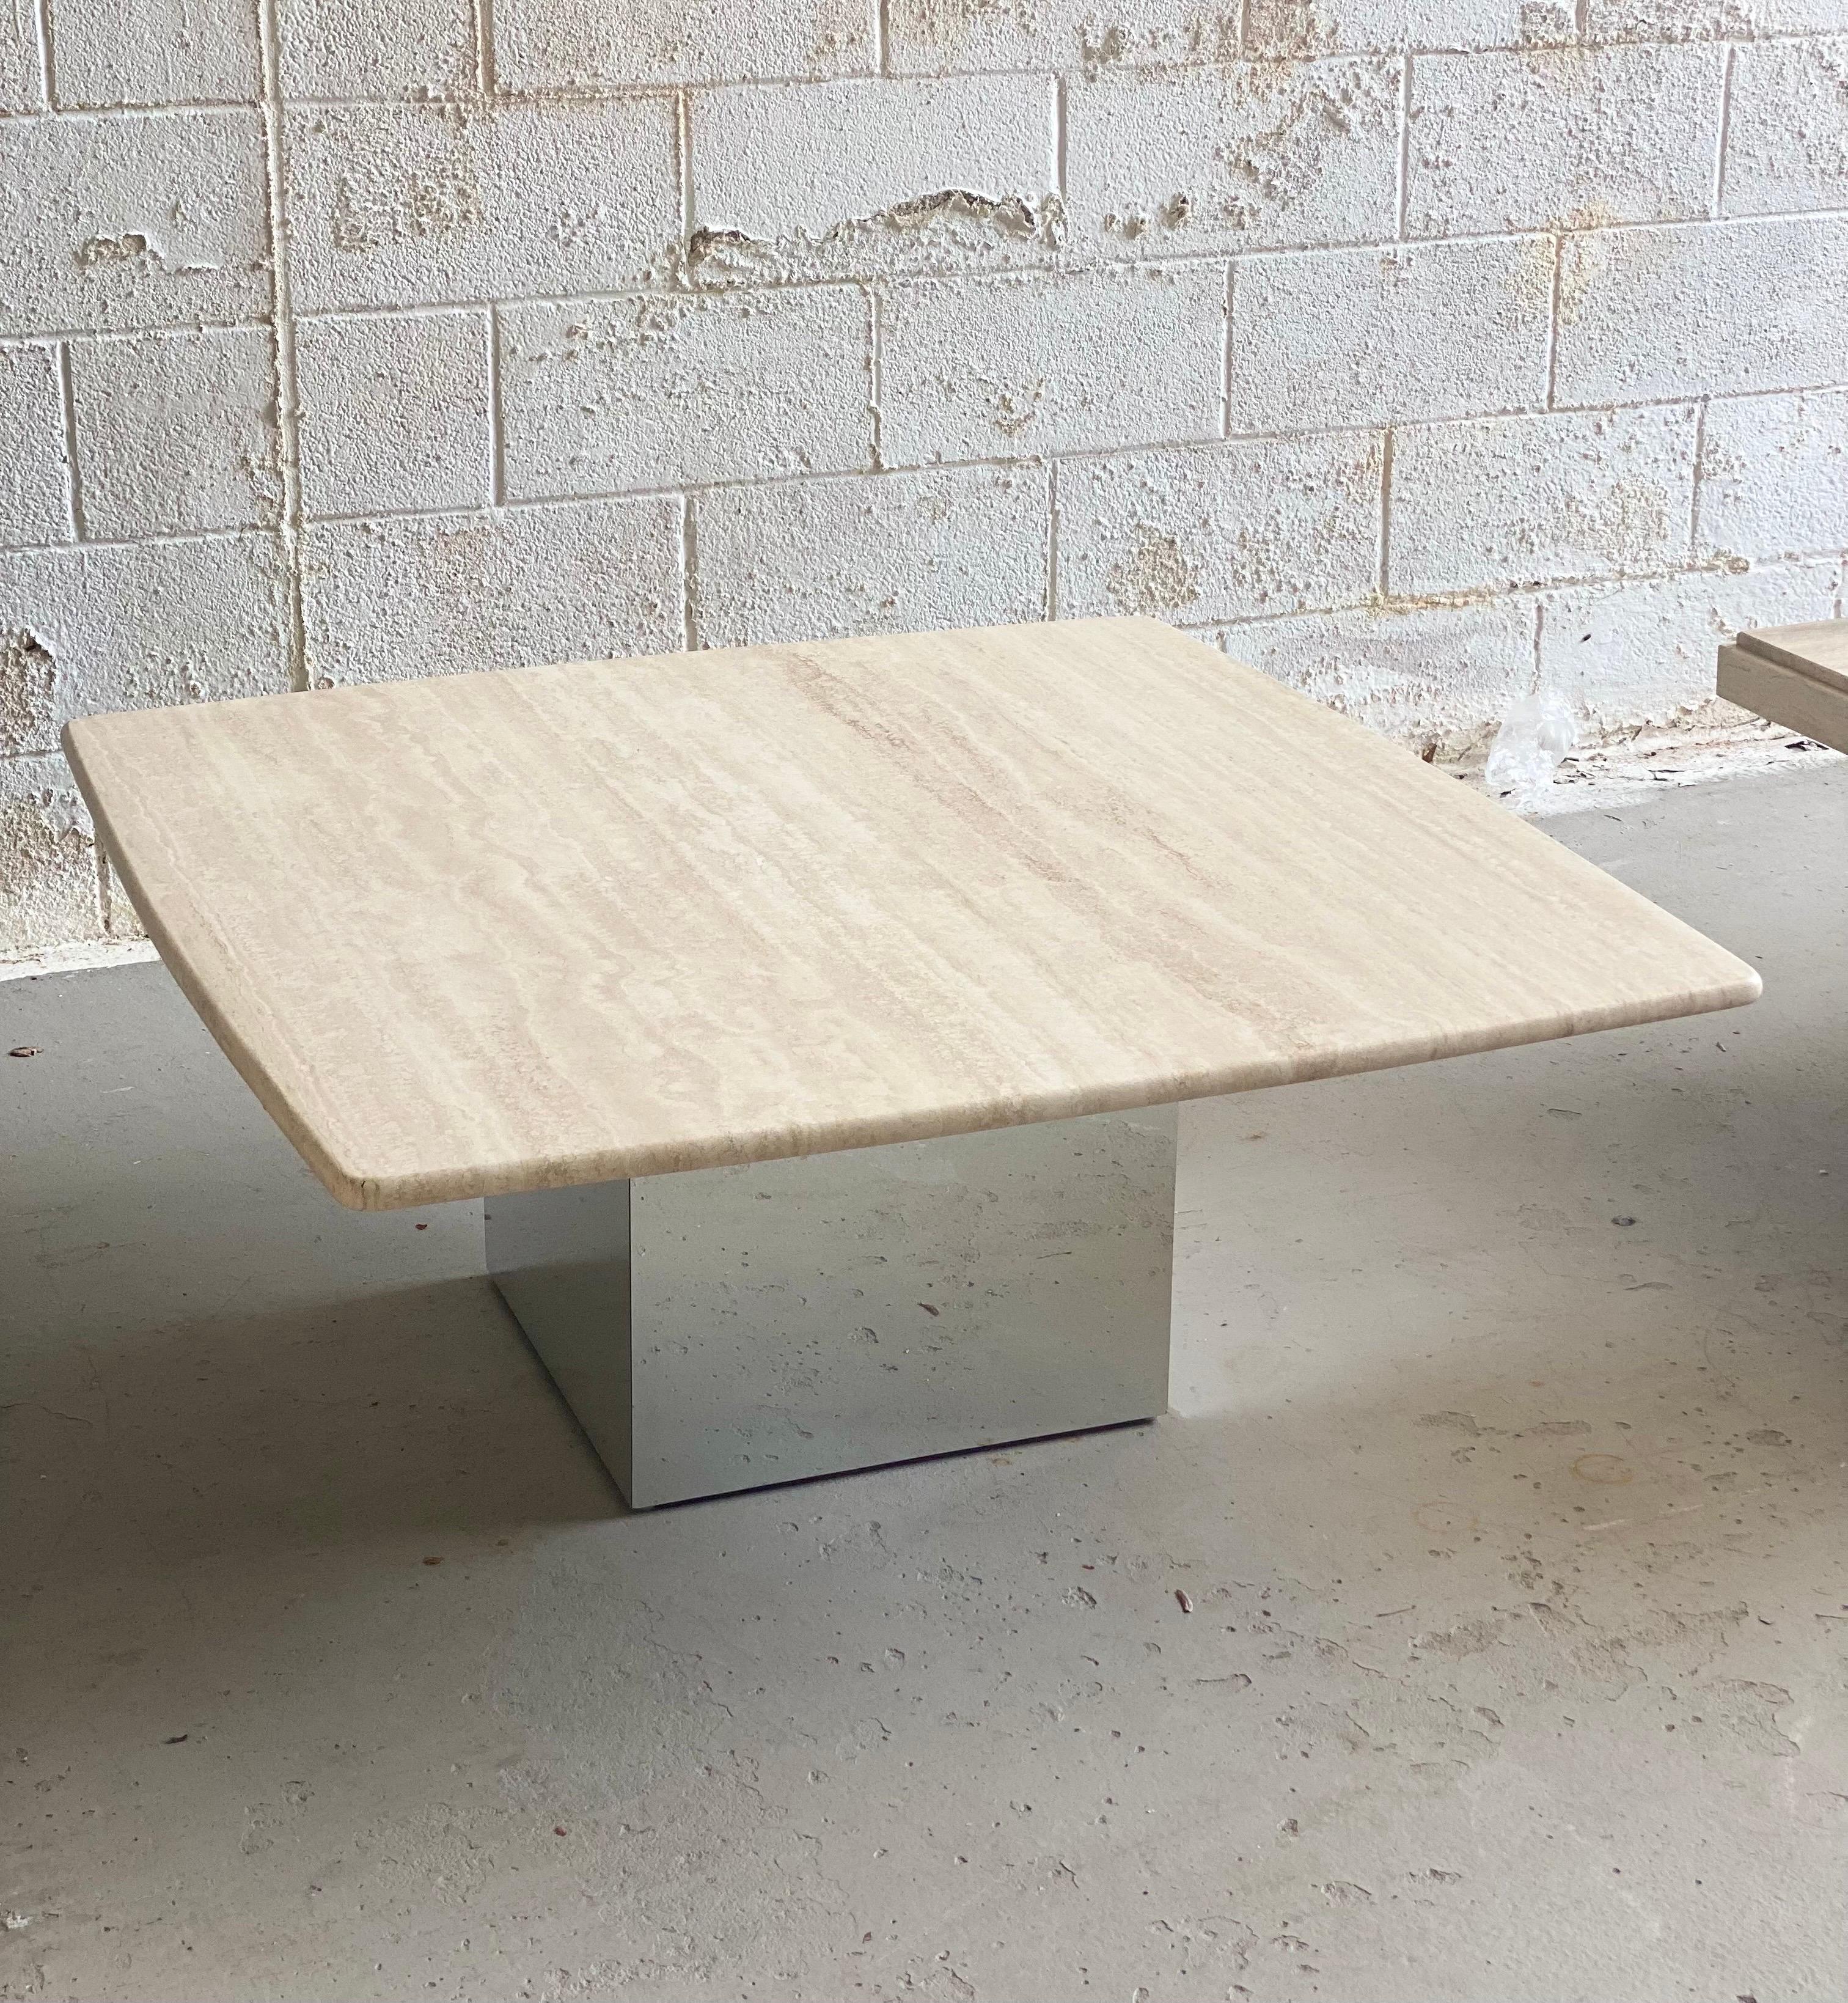 Modern 1970s Italian Honed Travertine and Chrome Square Coffee Table For Sale